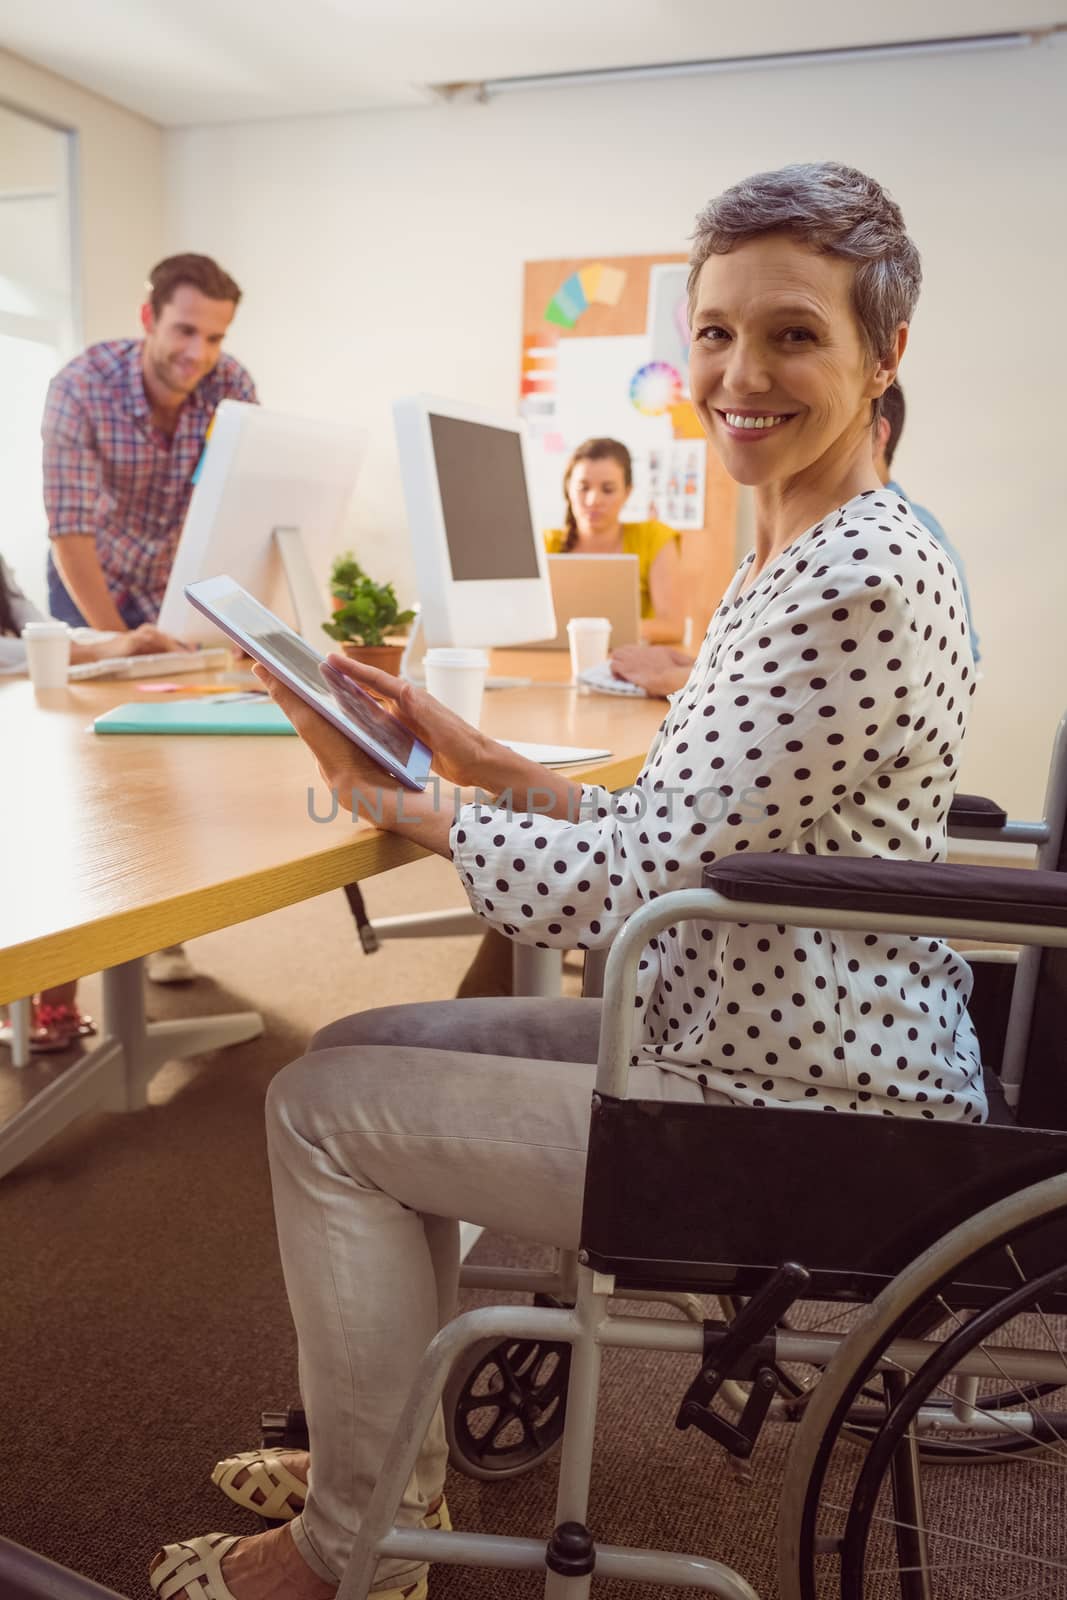 Creative businesswoman in wheelchair using a tablet in the office